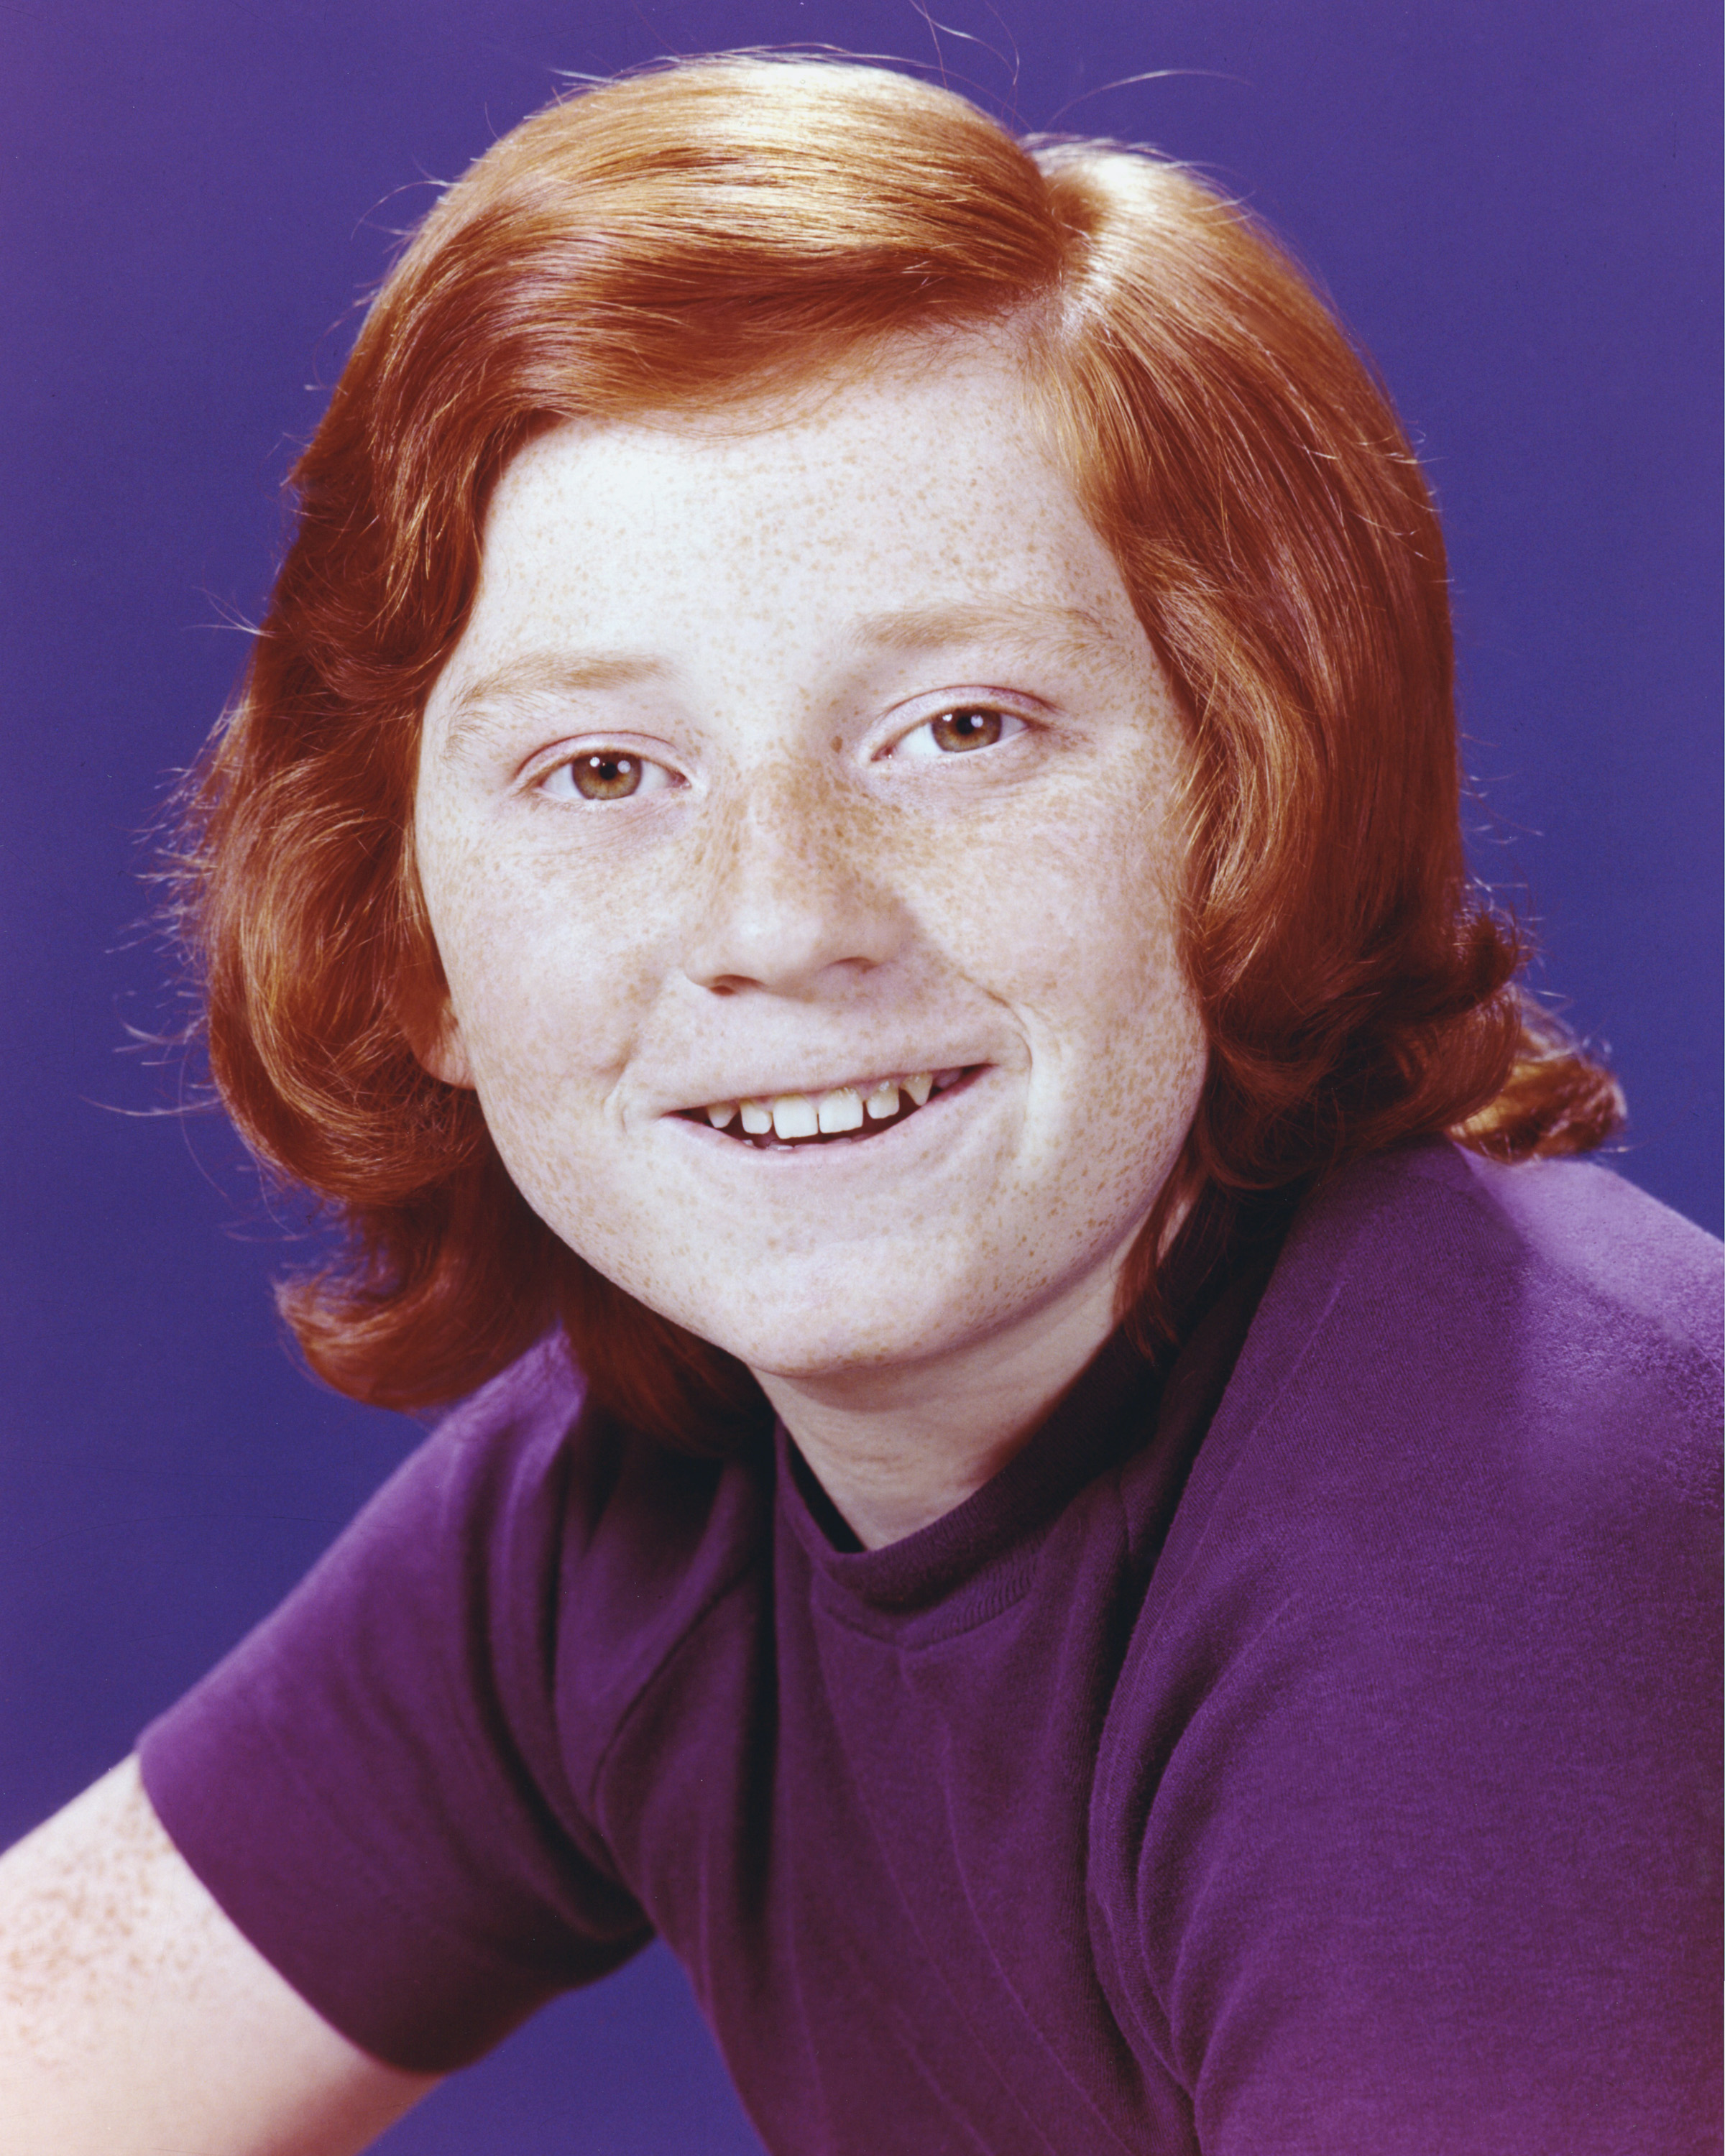 Danny Bonaduce on the set of "The Partridge Family" in 1970 | Source: Getty Images